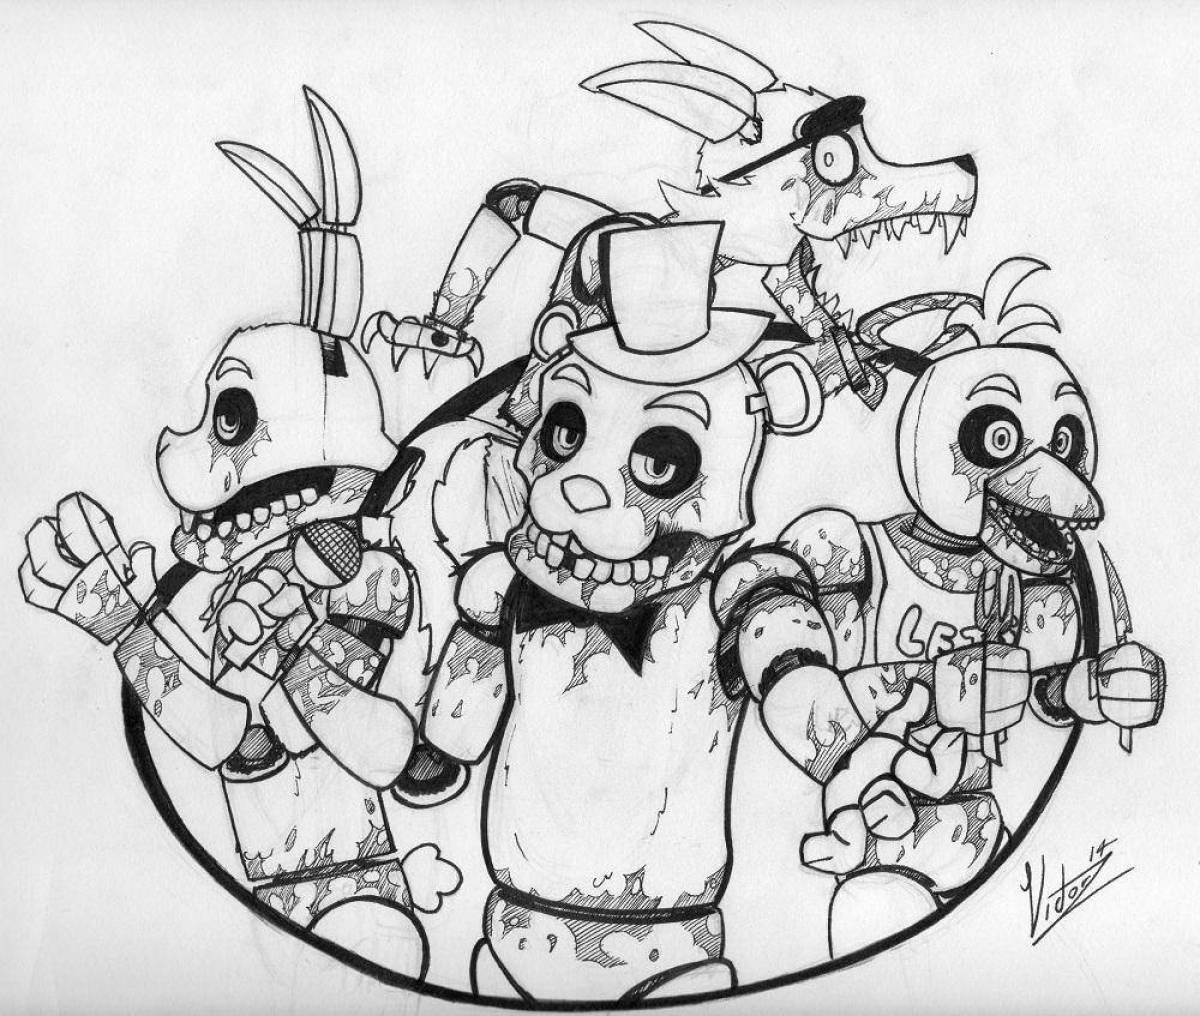 Five Nights at Freddy's intriguing coloring book